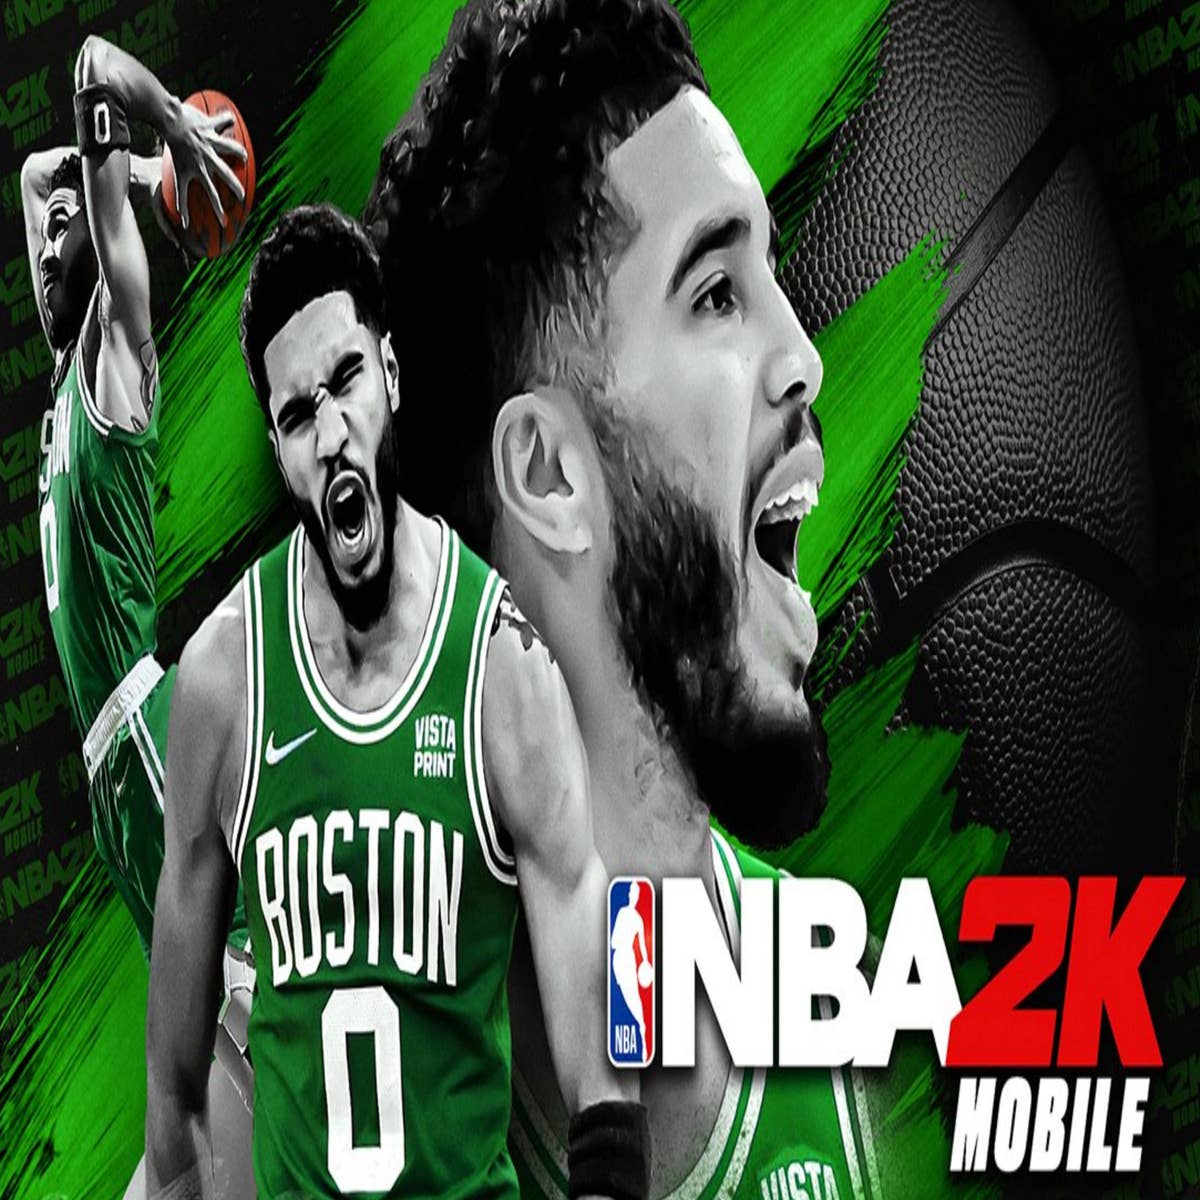 Who are the NBA 2K23 Cover Athletes? – NBA 2K UPDATES